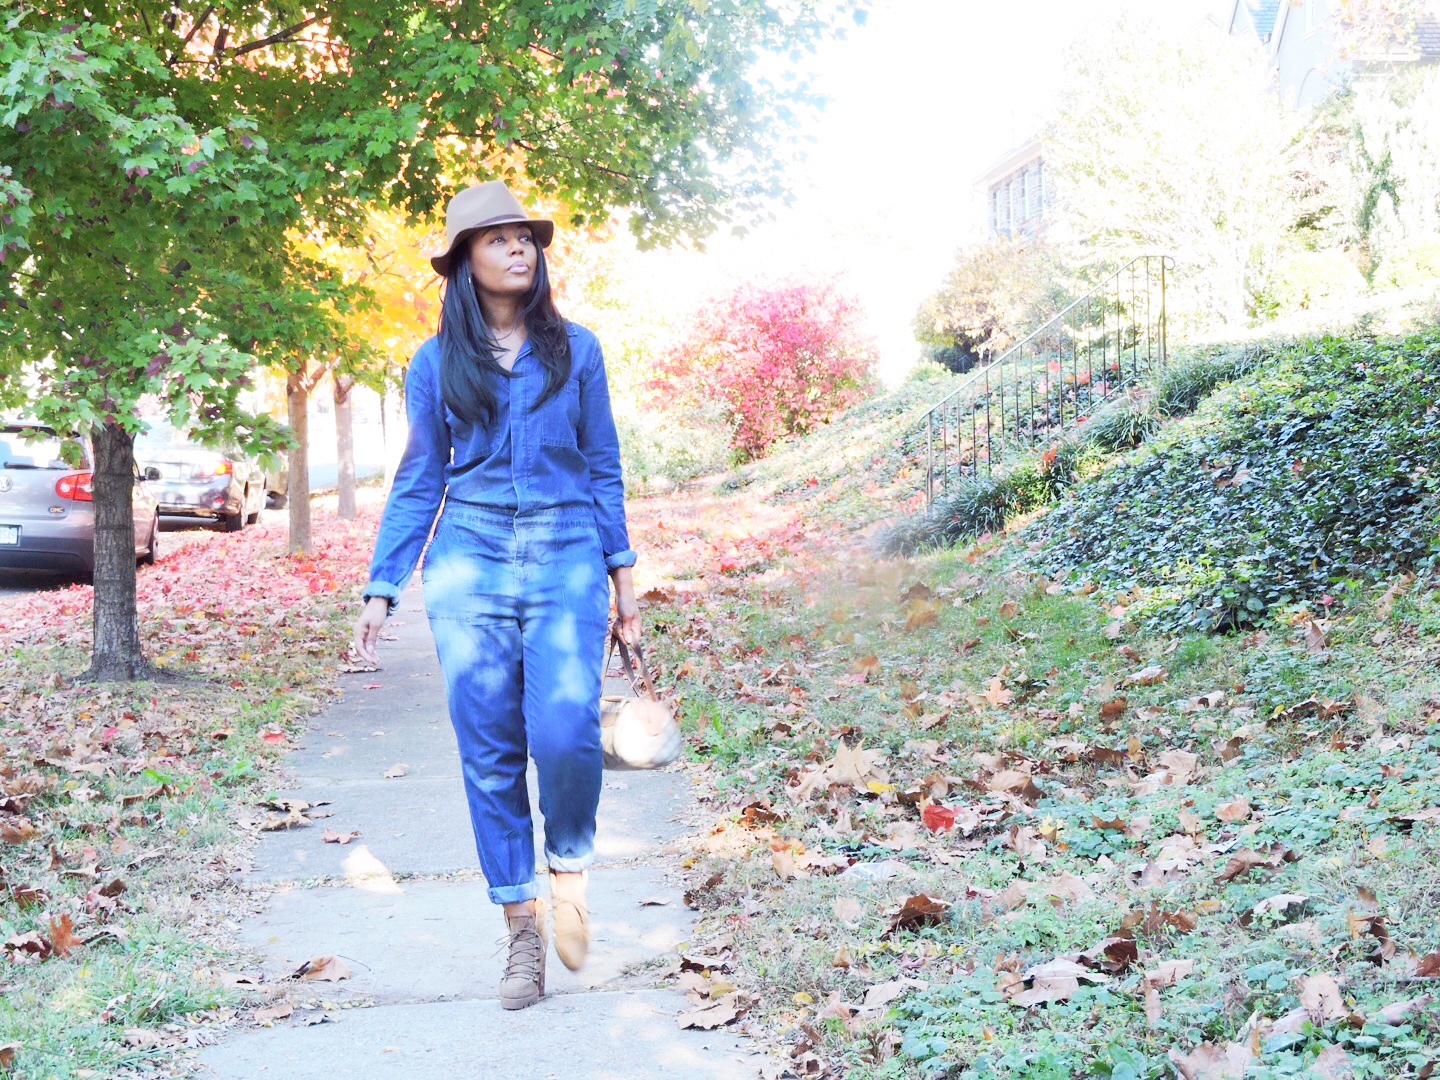  Shannan's Look: Hat and Jumpsuit Forever21 | Boots DSW Warehouse | Bag Gucci {old} 